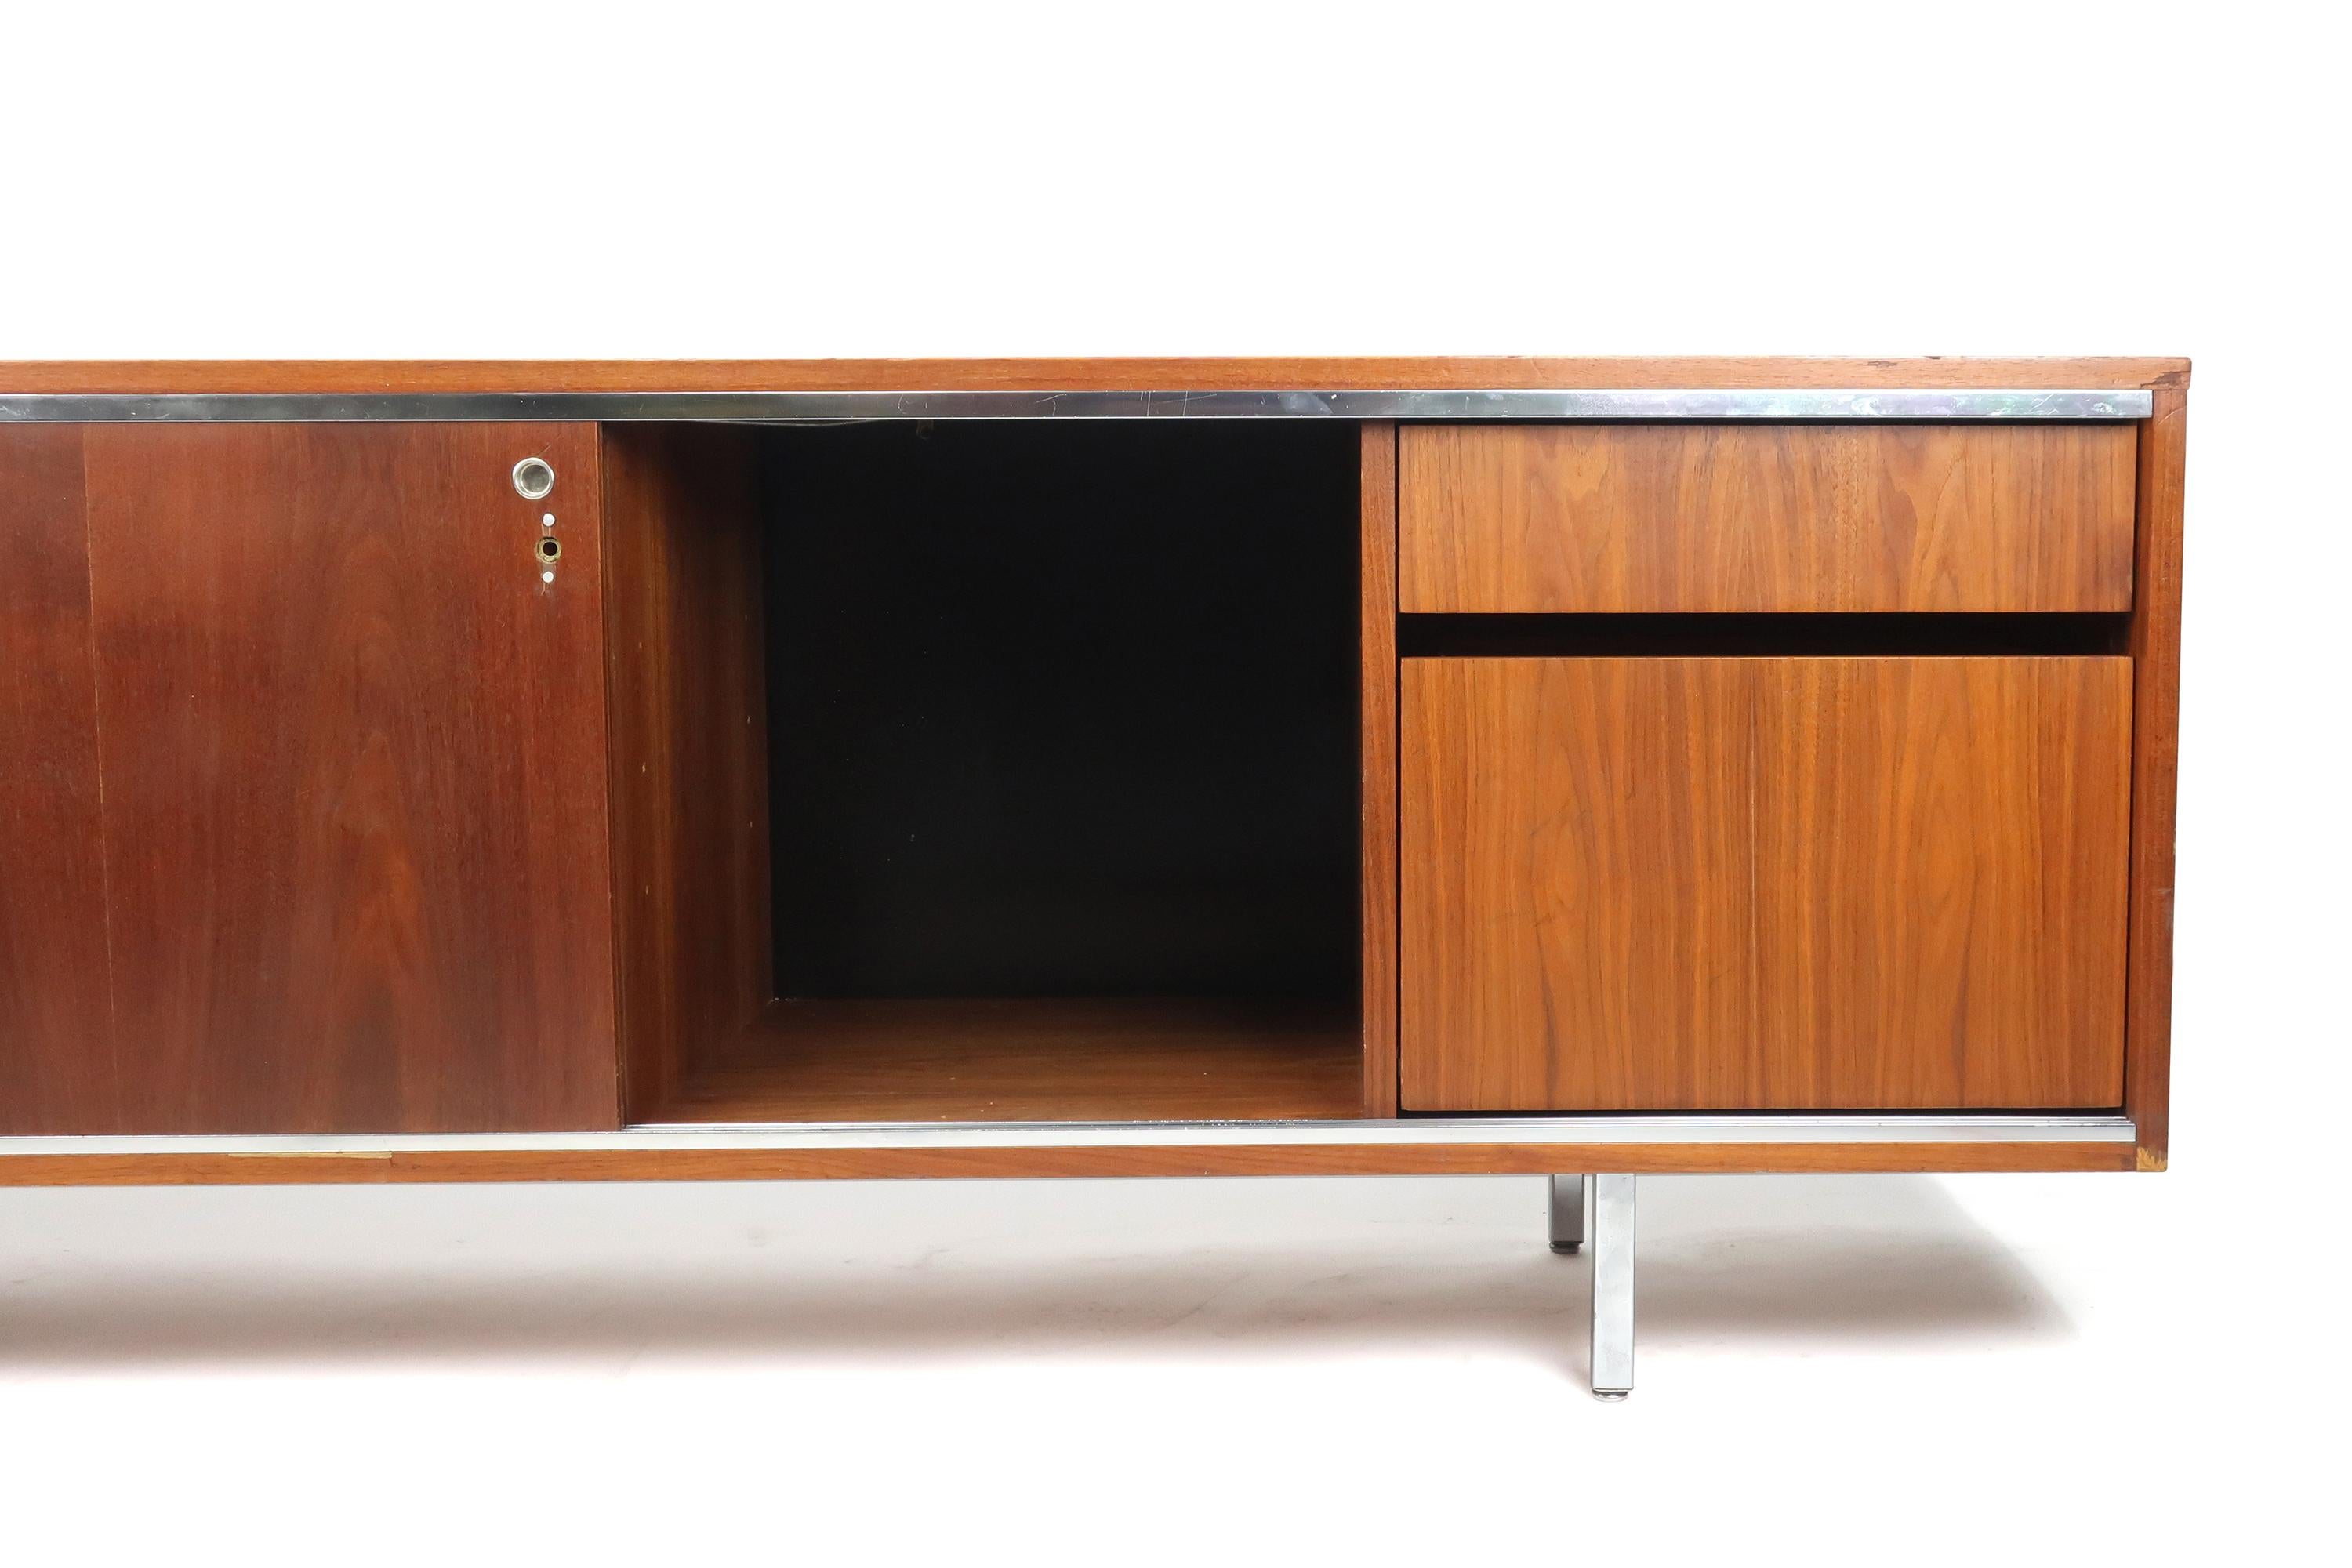 An exceptional Mid-Century Modern George Nelson executive office group credenza for Herman Miller. Walnut case with rich grain and original finish, well preserved walnut top, chrome accents and original legs, and two walnut veneer sliding doors with